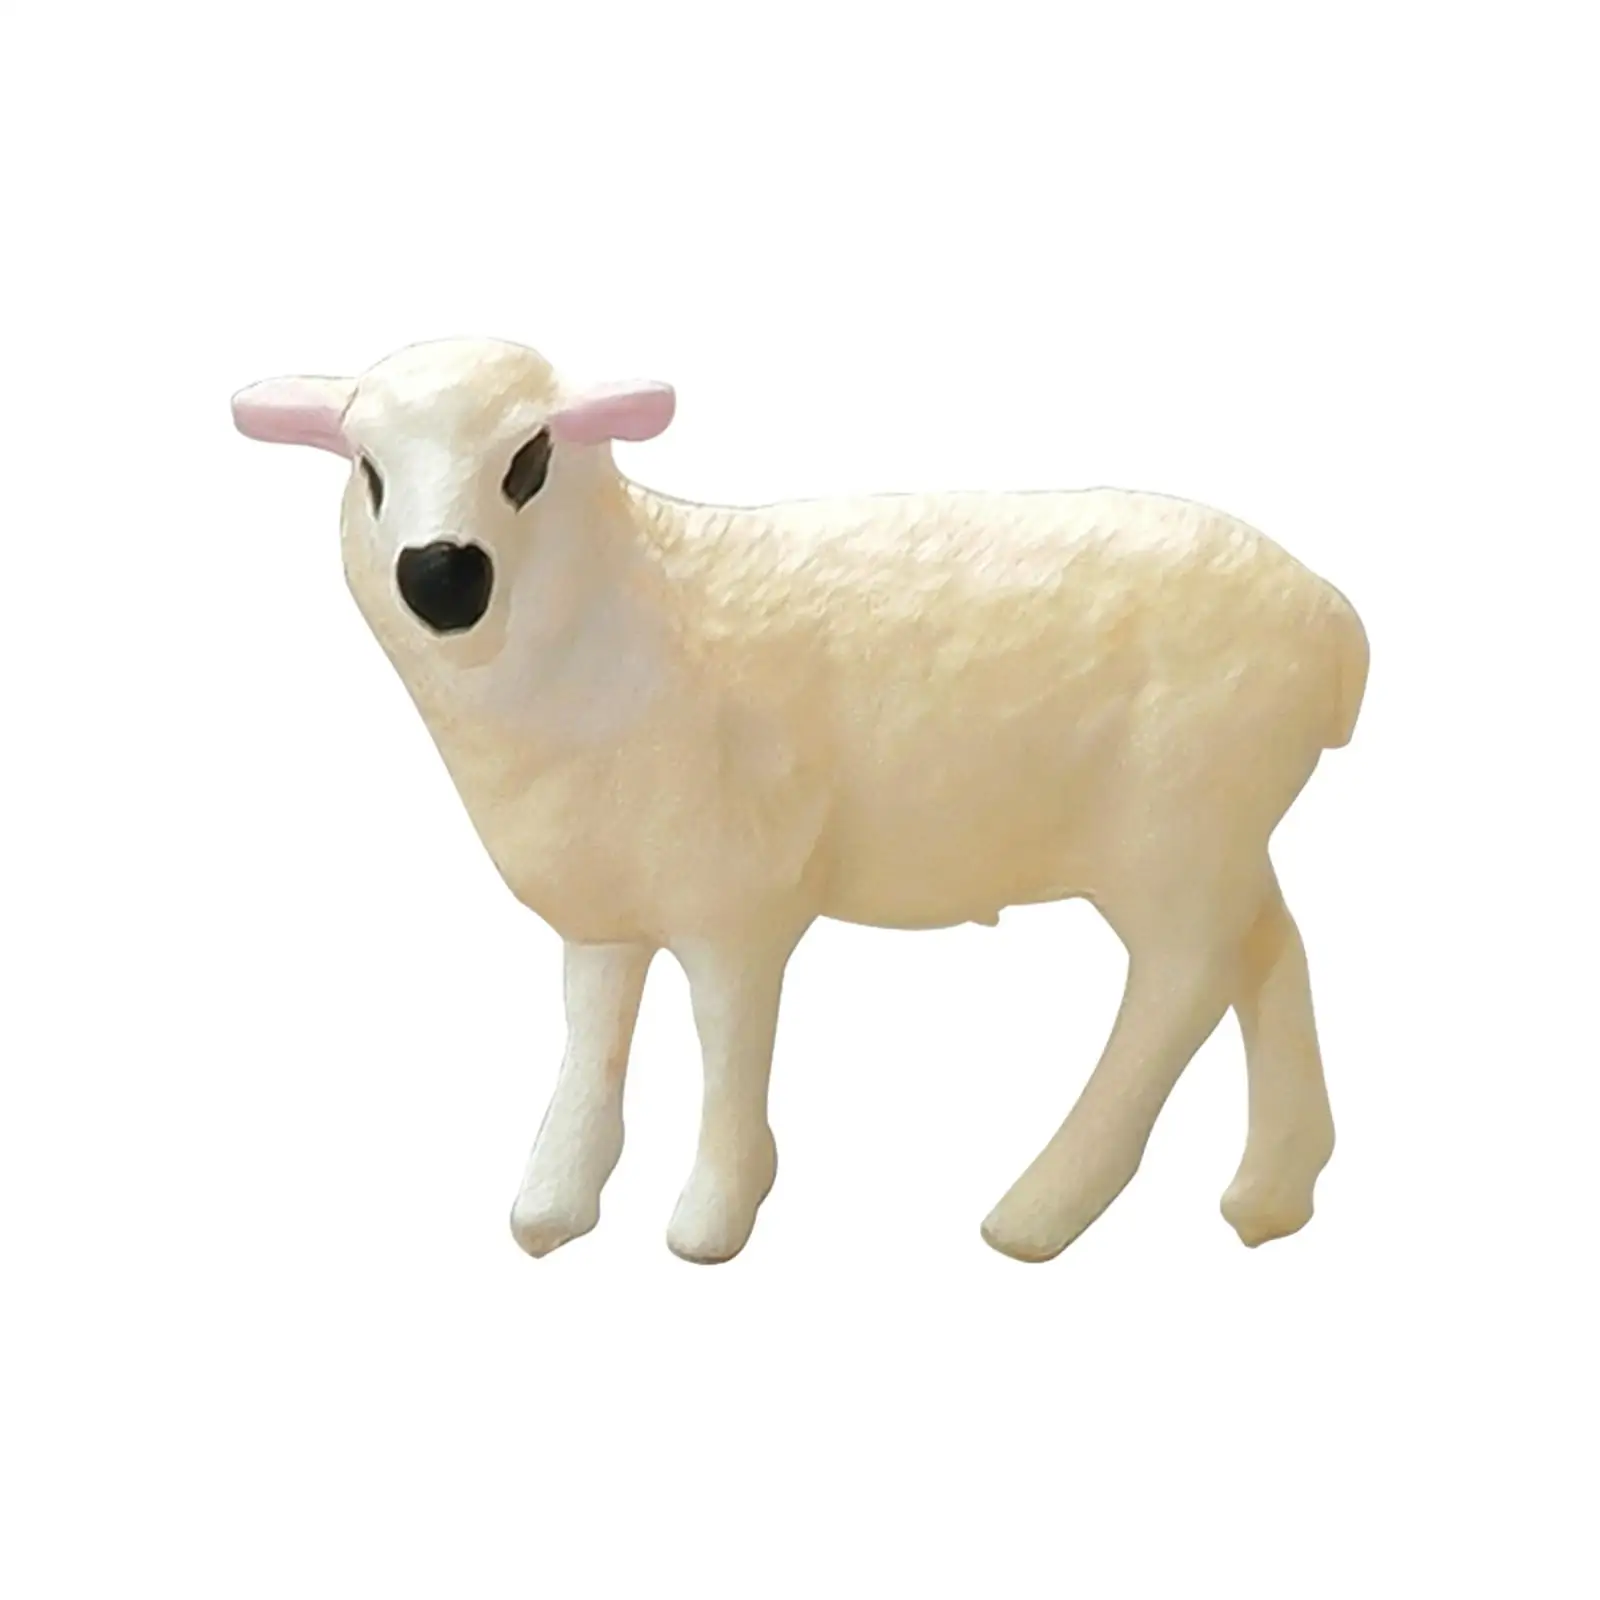 Sheep Model 1:64 Hand Painted Toy Sheep Figurine Model Building Kits